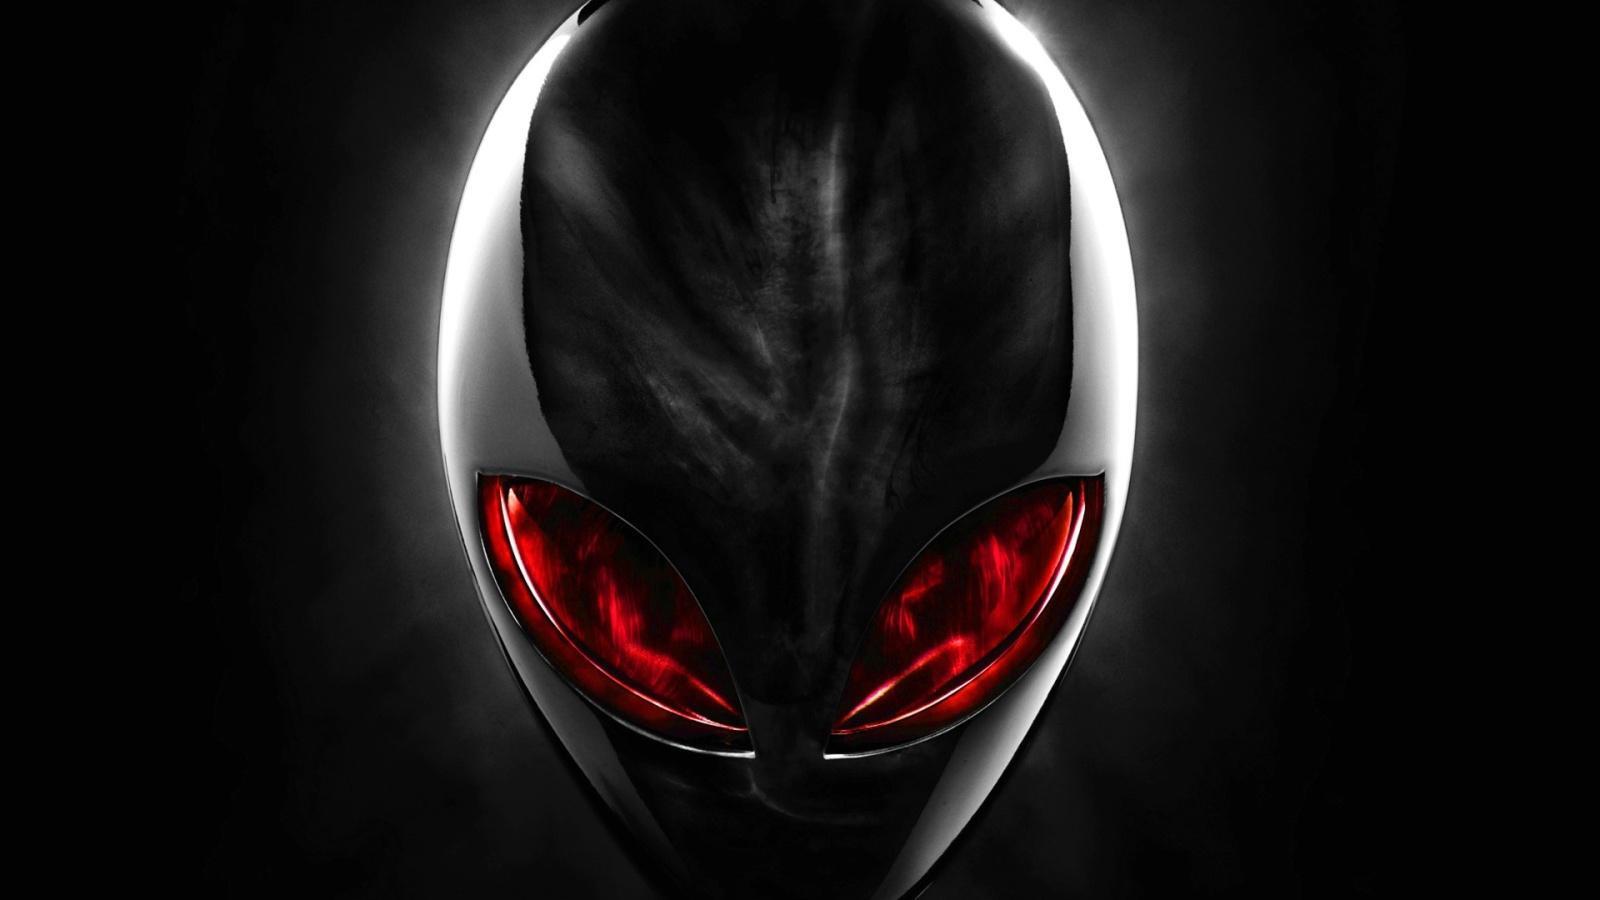 Wallpapers extraterrestrial red eyes on the desktop